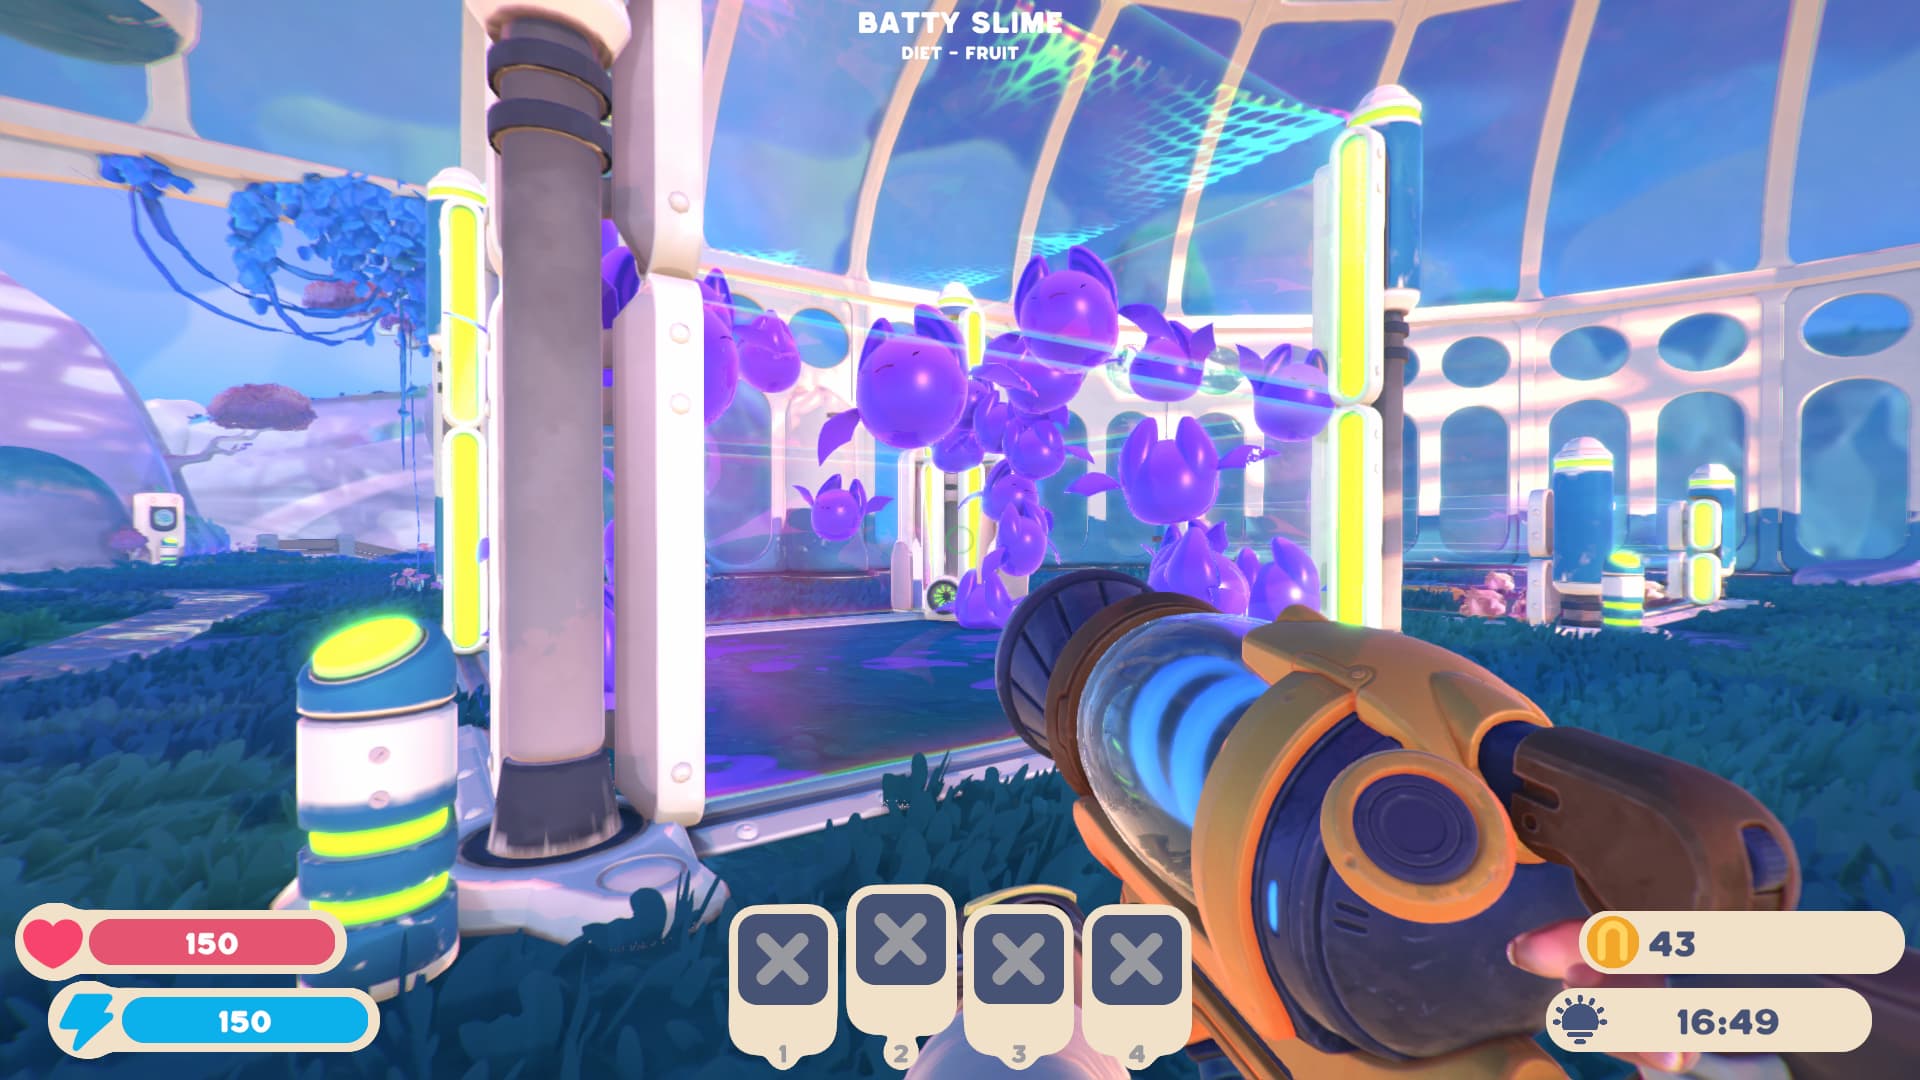 Screenshot in Slime Rancher 2 of several Batty Slimes inside of a corral slying around 